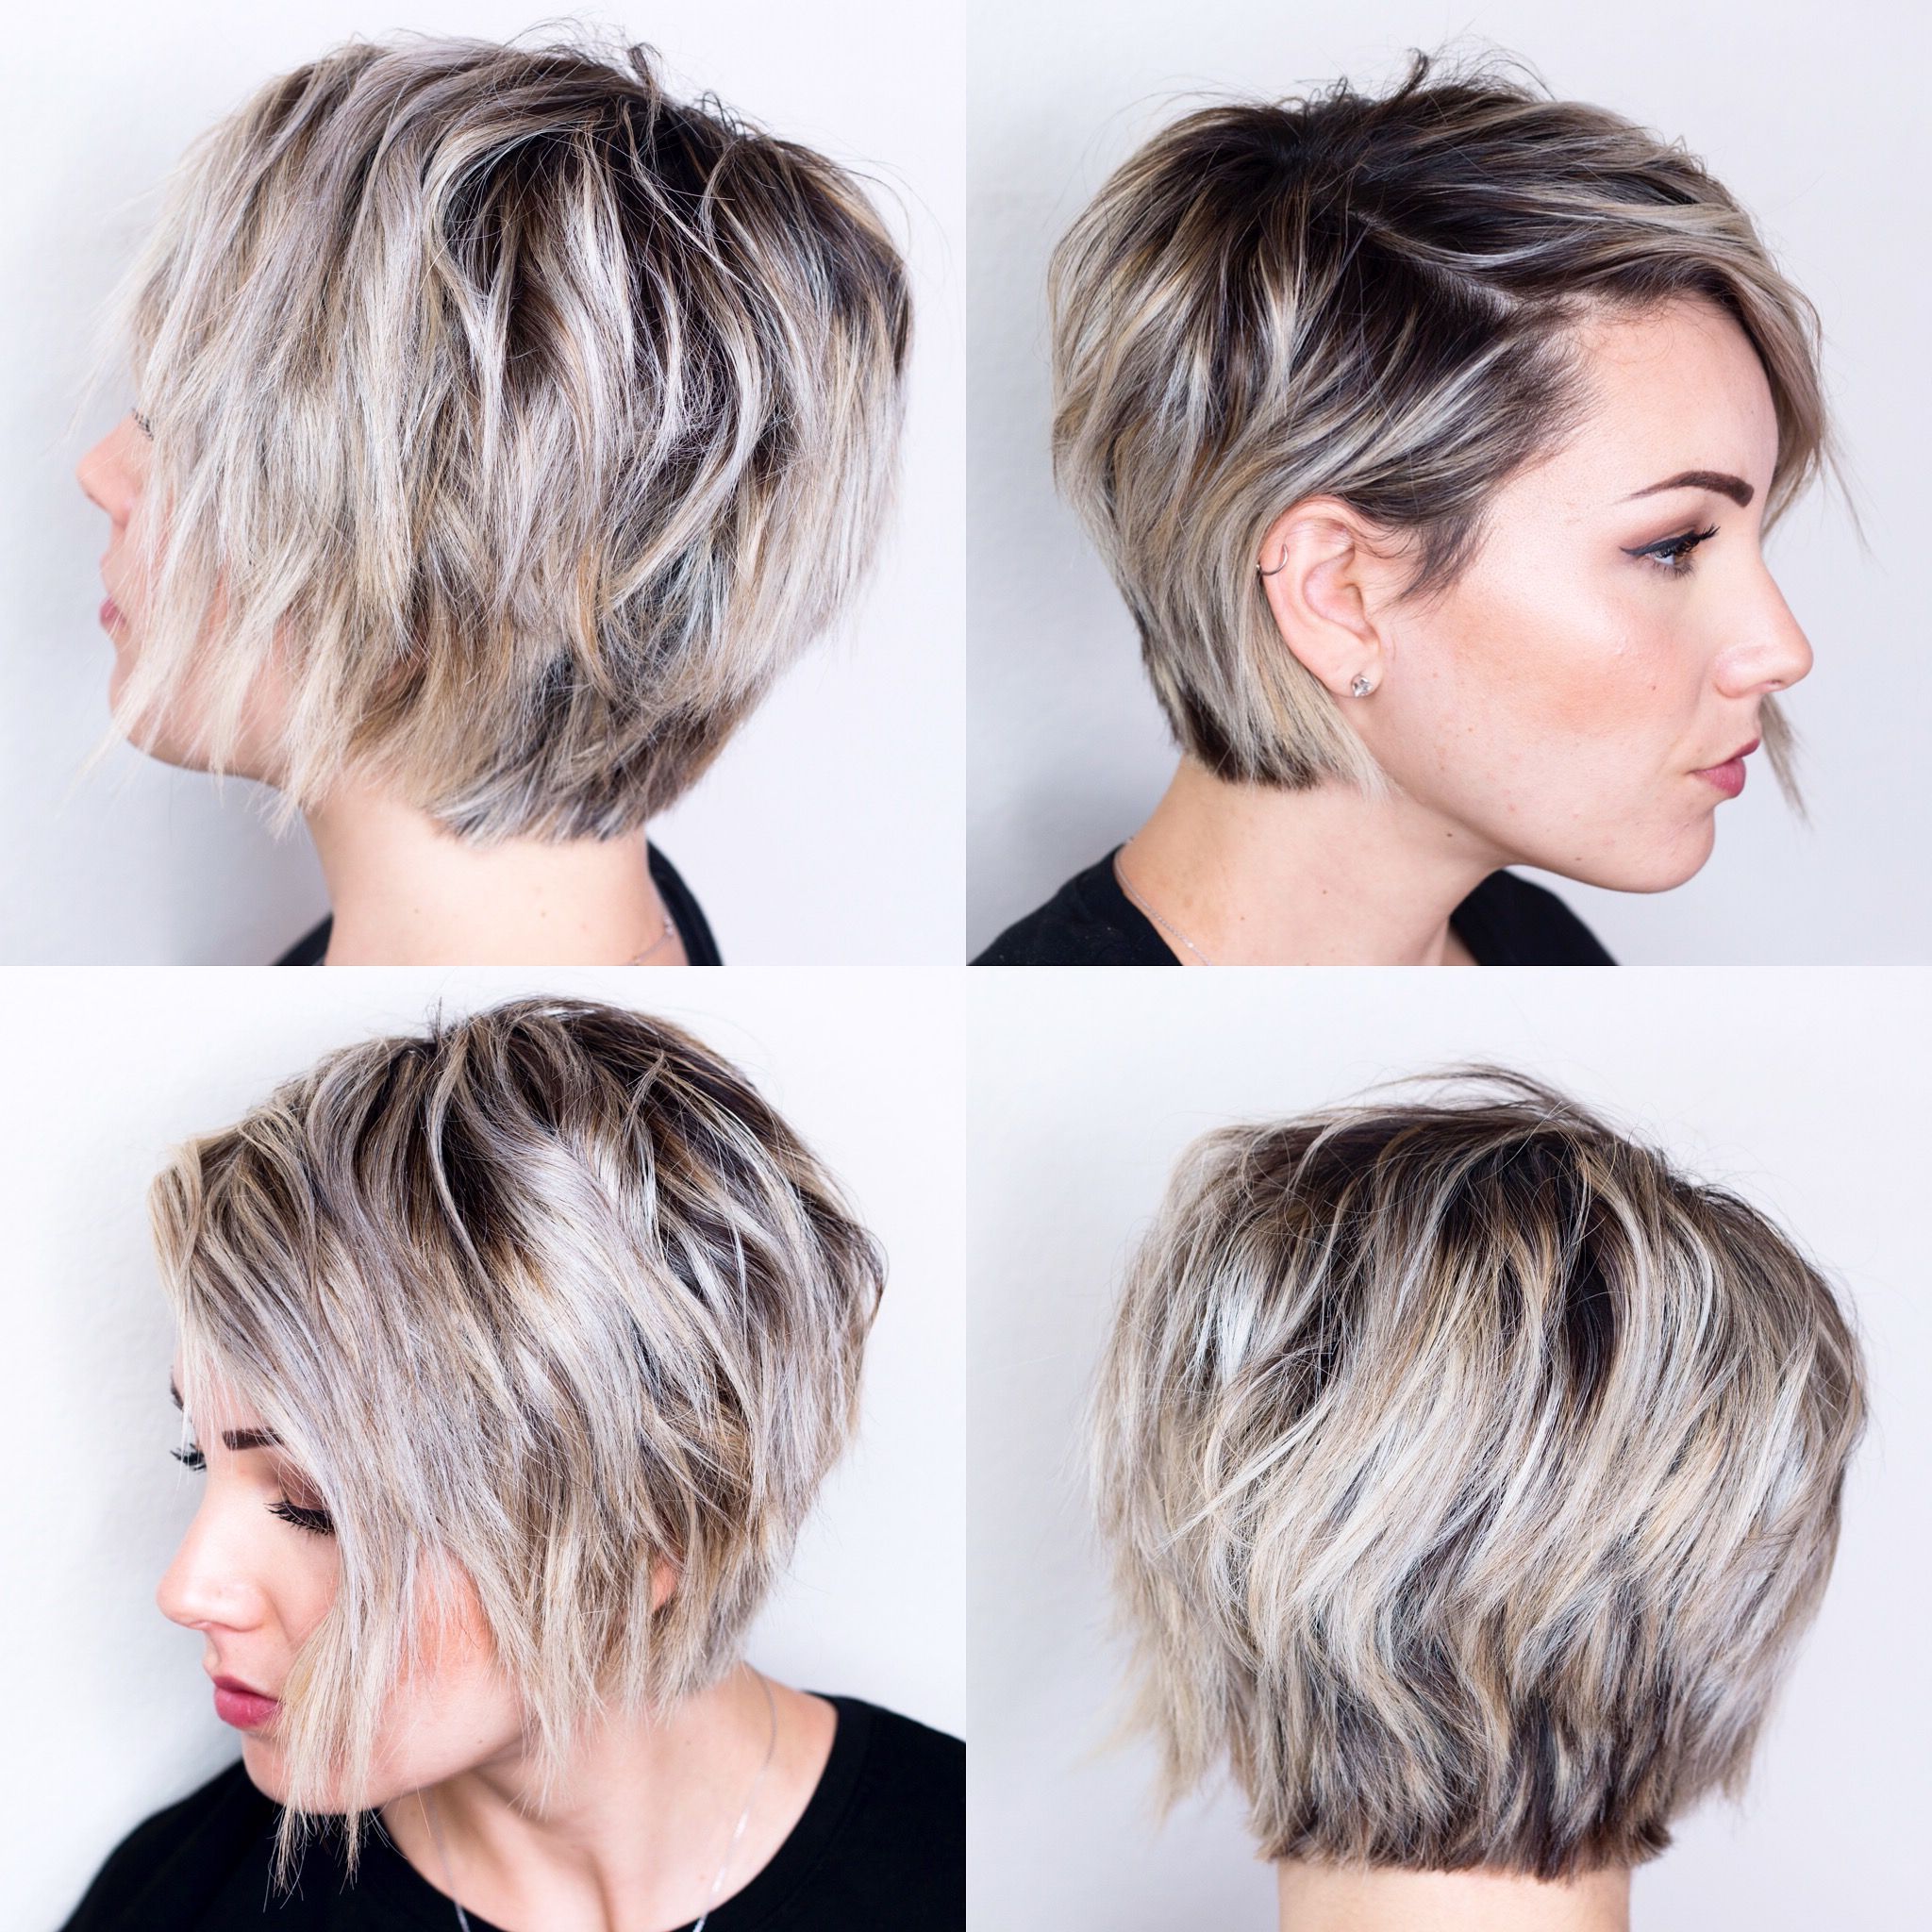 360 View Of Short Hair | H A I R In 2018 | Pinterest | Short Hair Throughout Short Haircuts For Women With Oval Face (View 2 of 25)